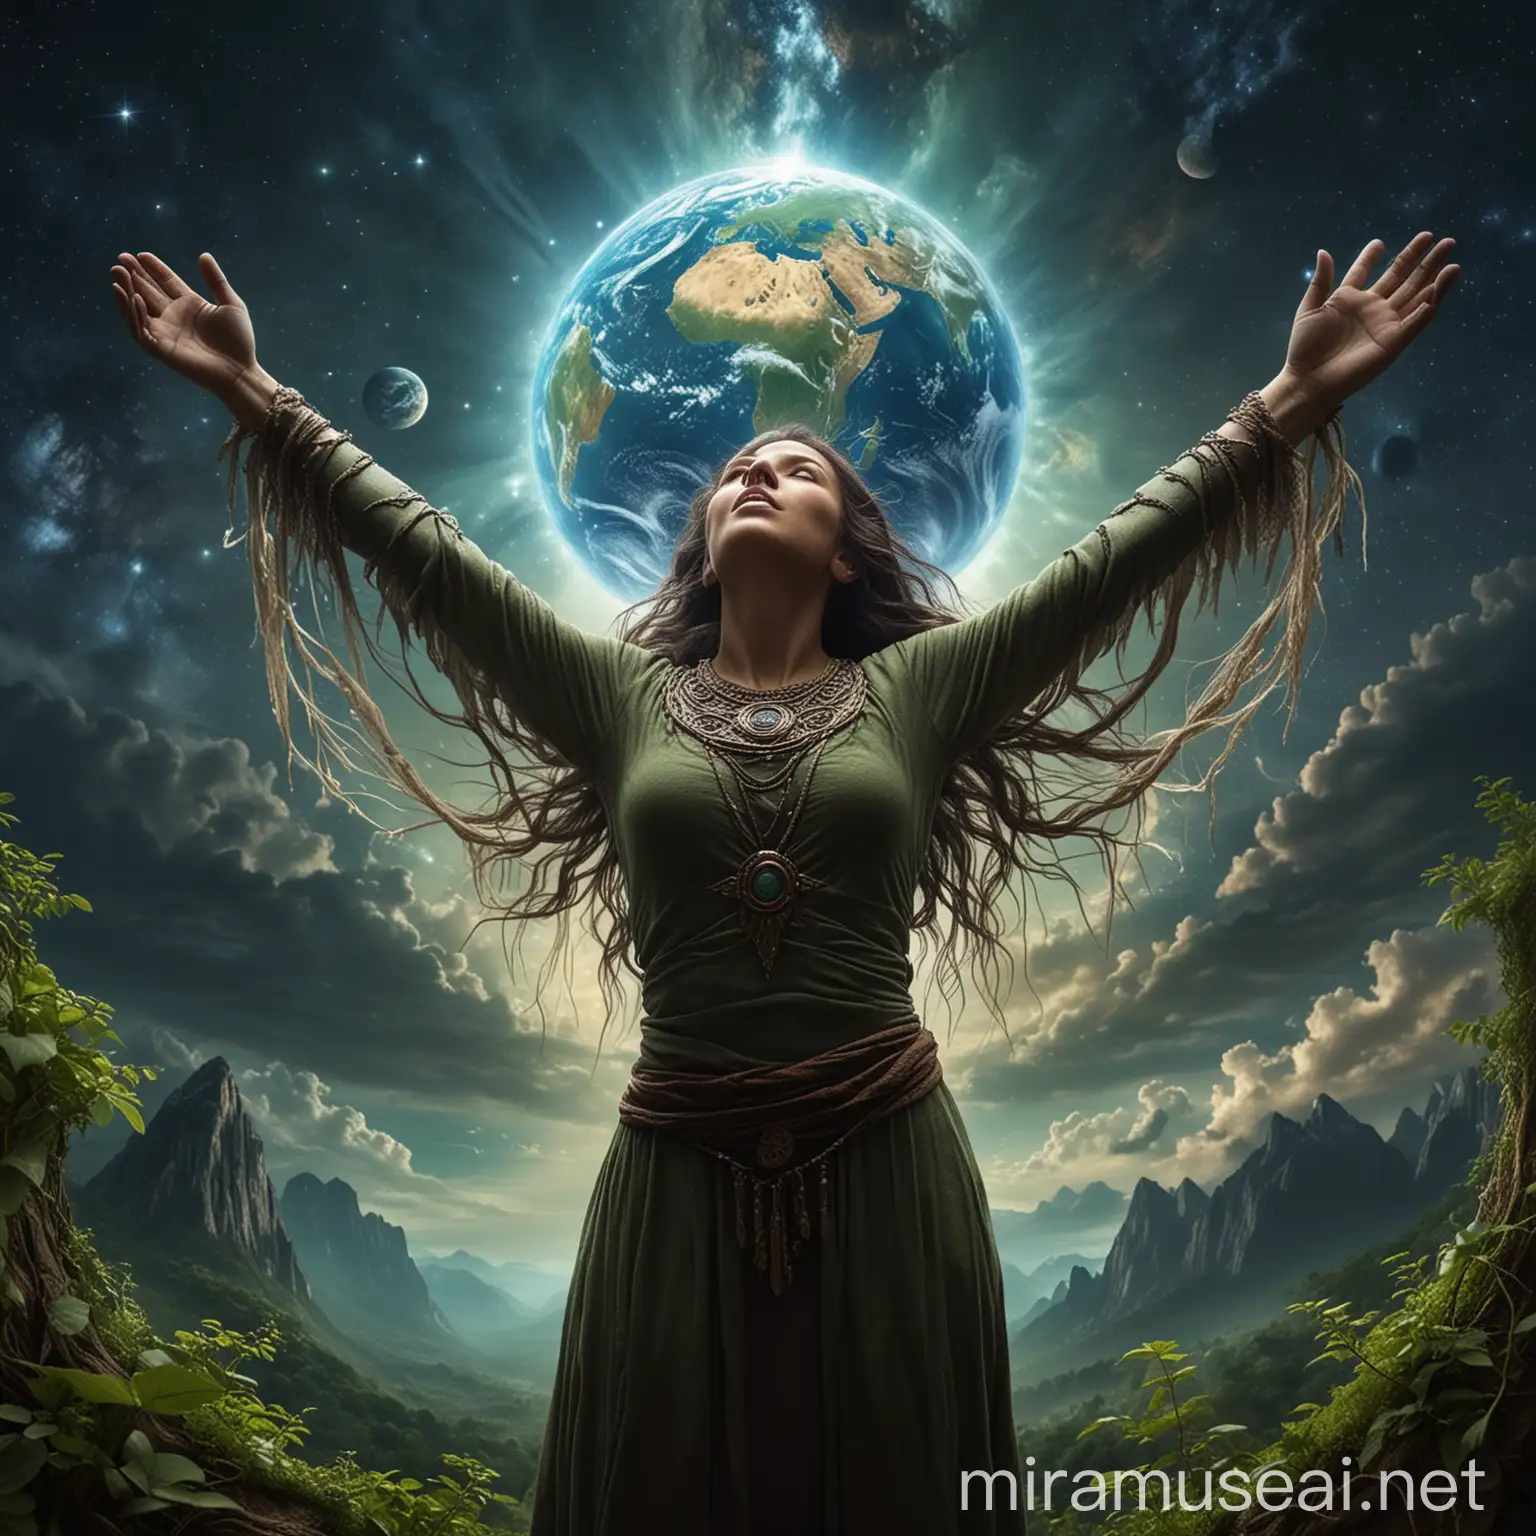 Earth Spirit Gaia looks at planet Earth and tries to shelter it with her outstretched arms